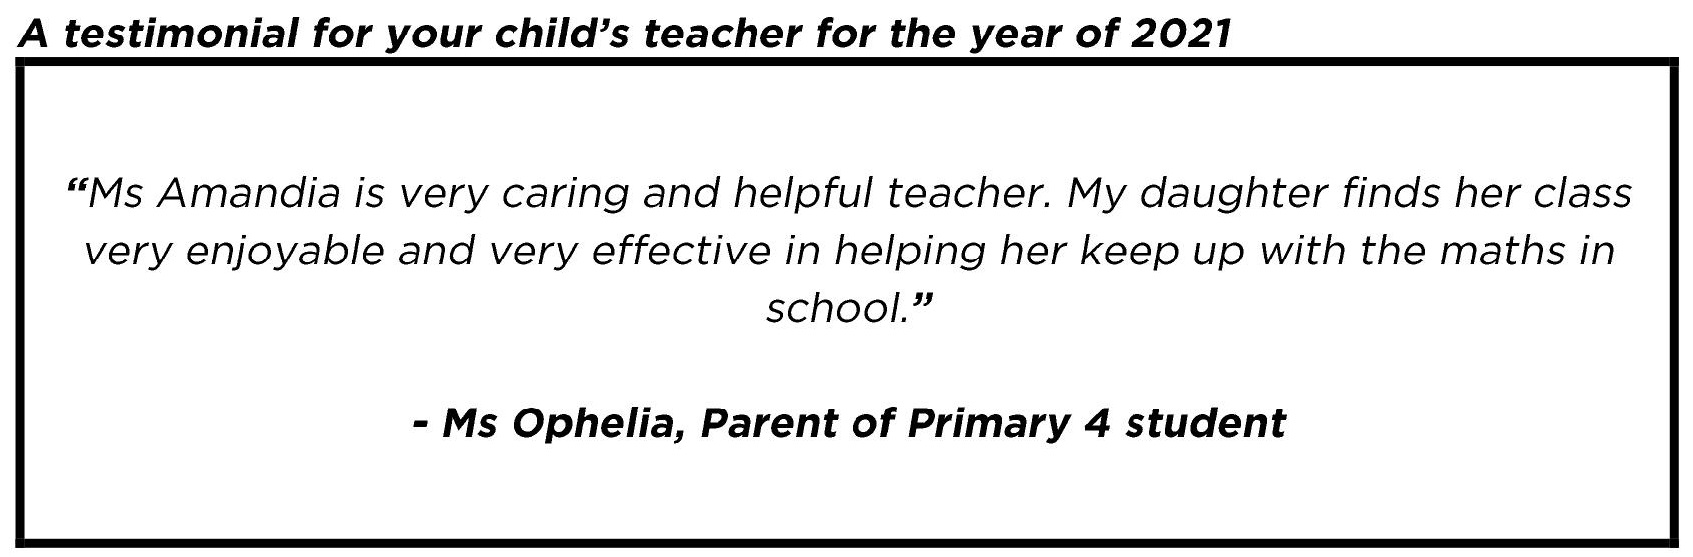 "...finds her class very enjoyable and very effective in helping her keep up with the maths in school."